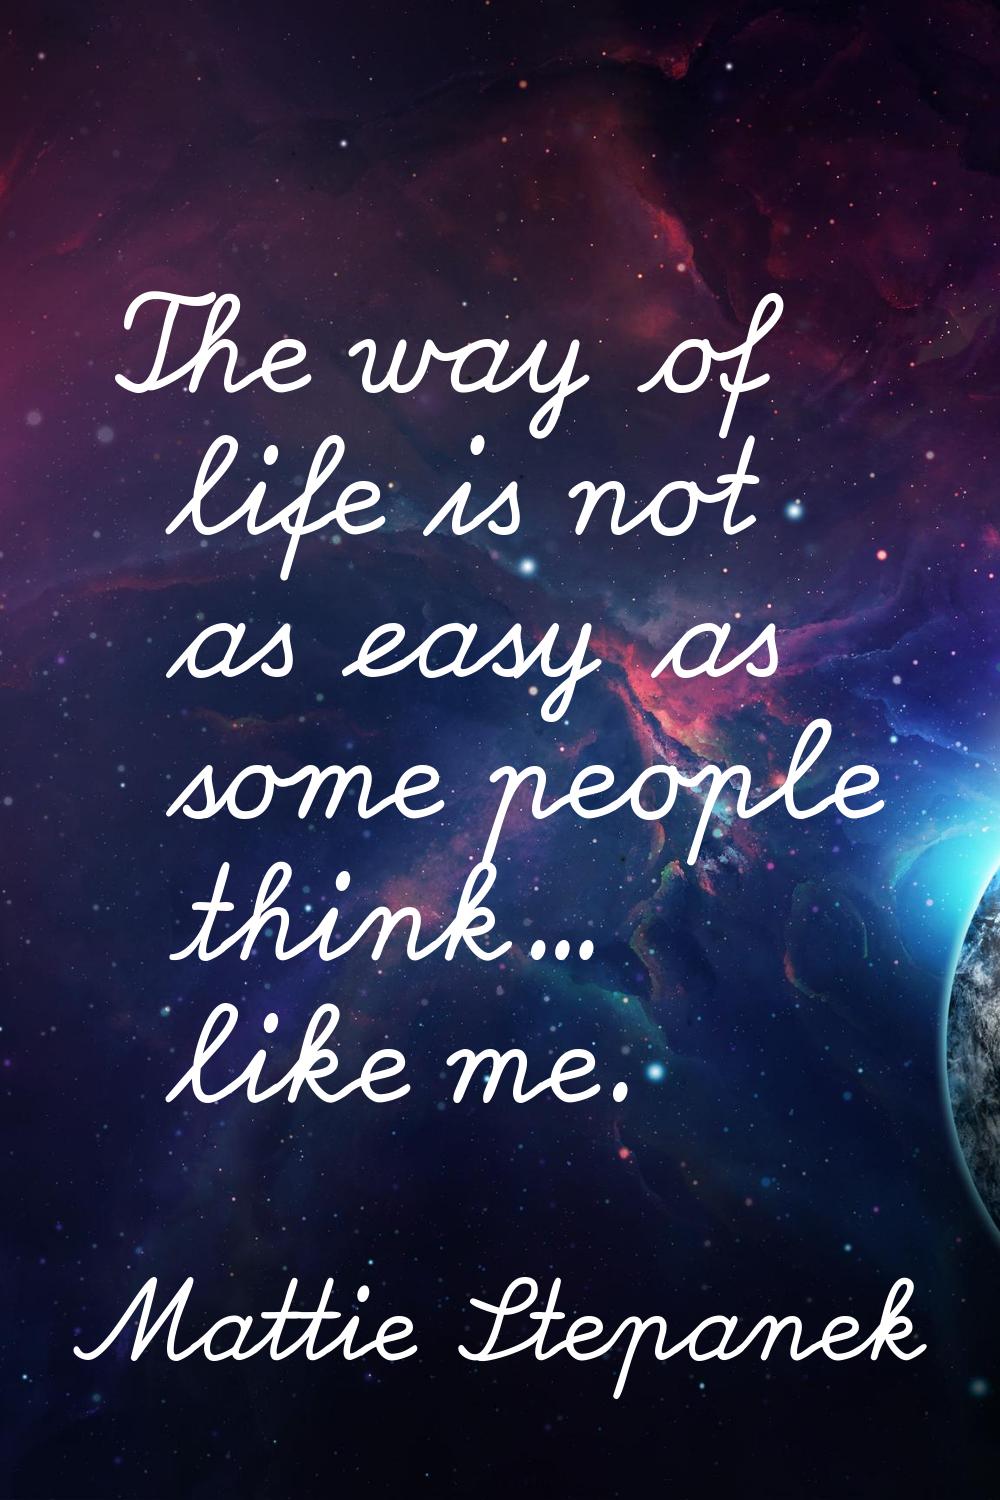 The way of life is not as easy as some people think... like me.